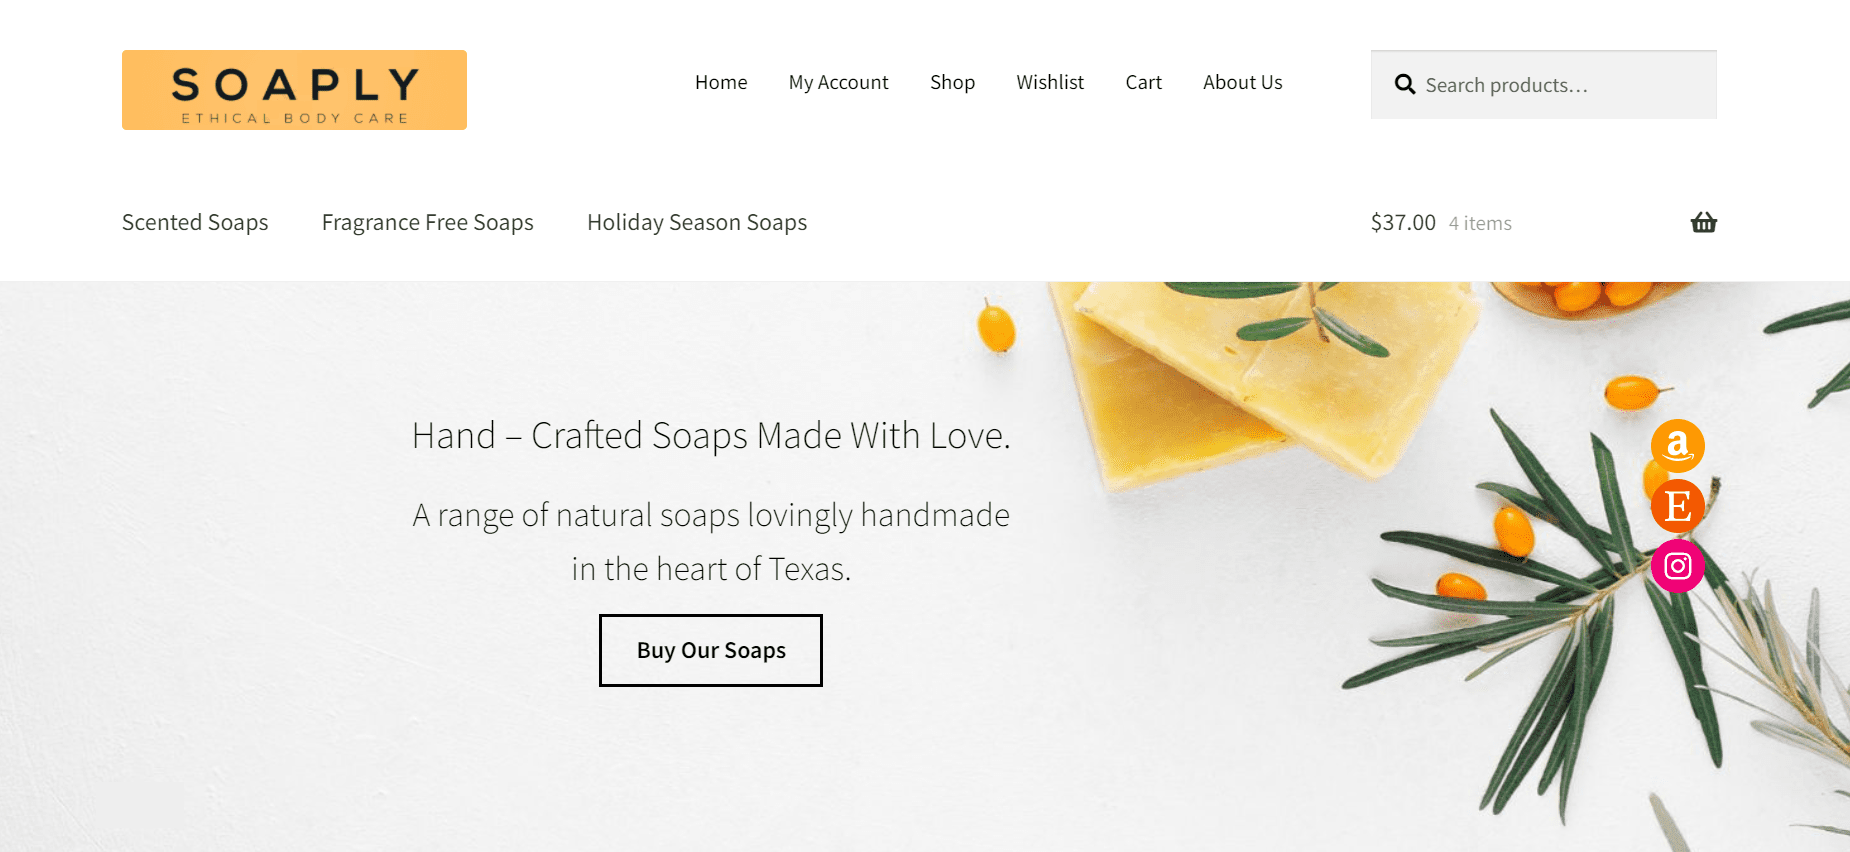 soaply homepage